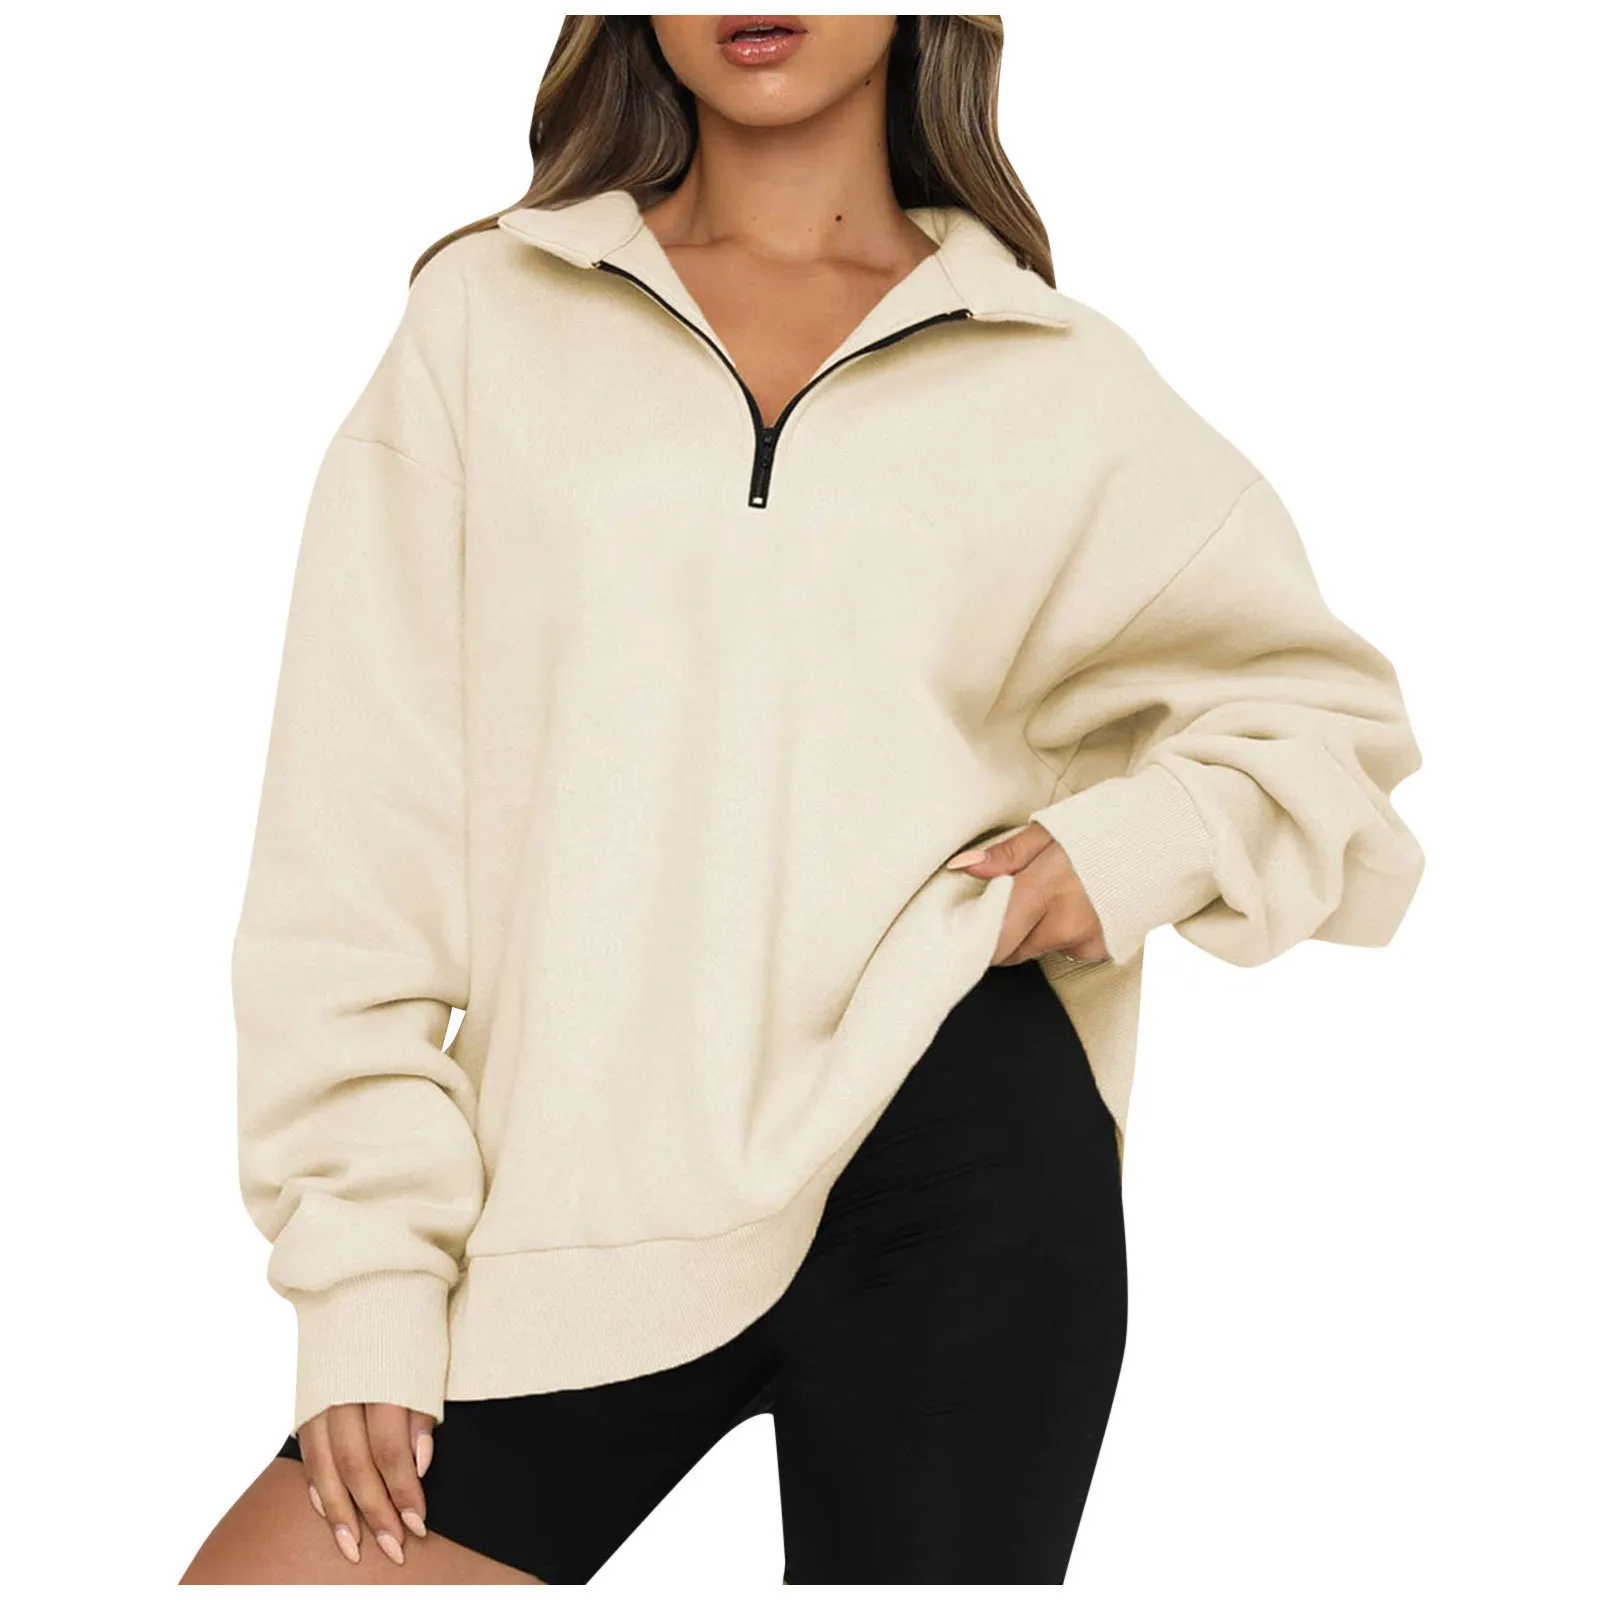 Designer Women Hoodie Plus size 3XL Fal Winter Long Sleeve Sweatshirts Casual Solid Pullover Tops Loose Turn Down Collar Outerwear Bulk Wholesale Clothes 11005